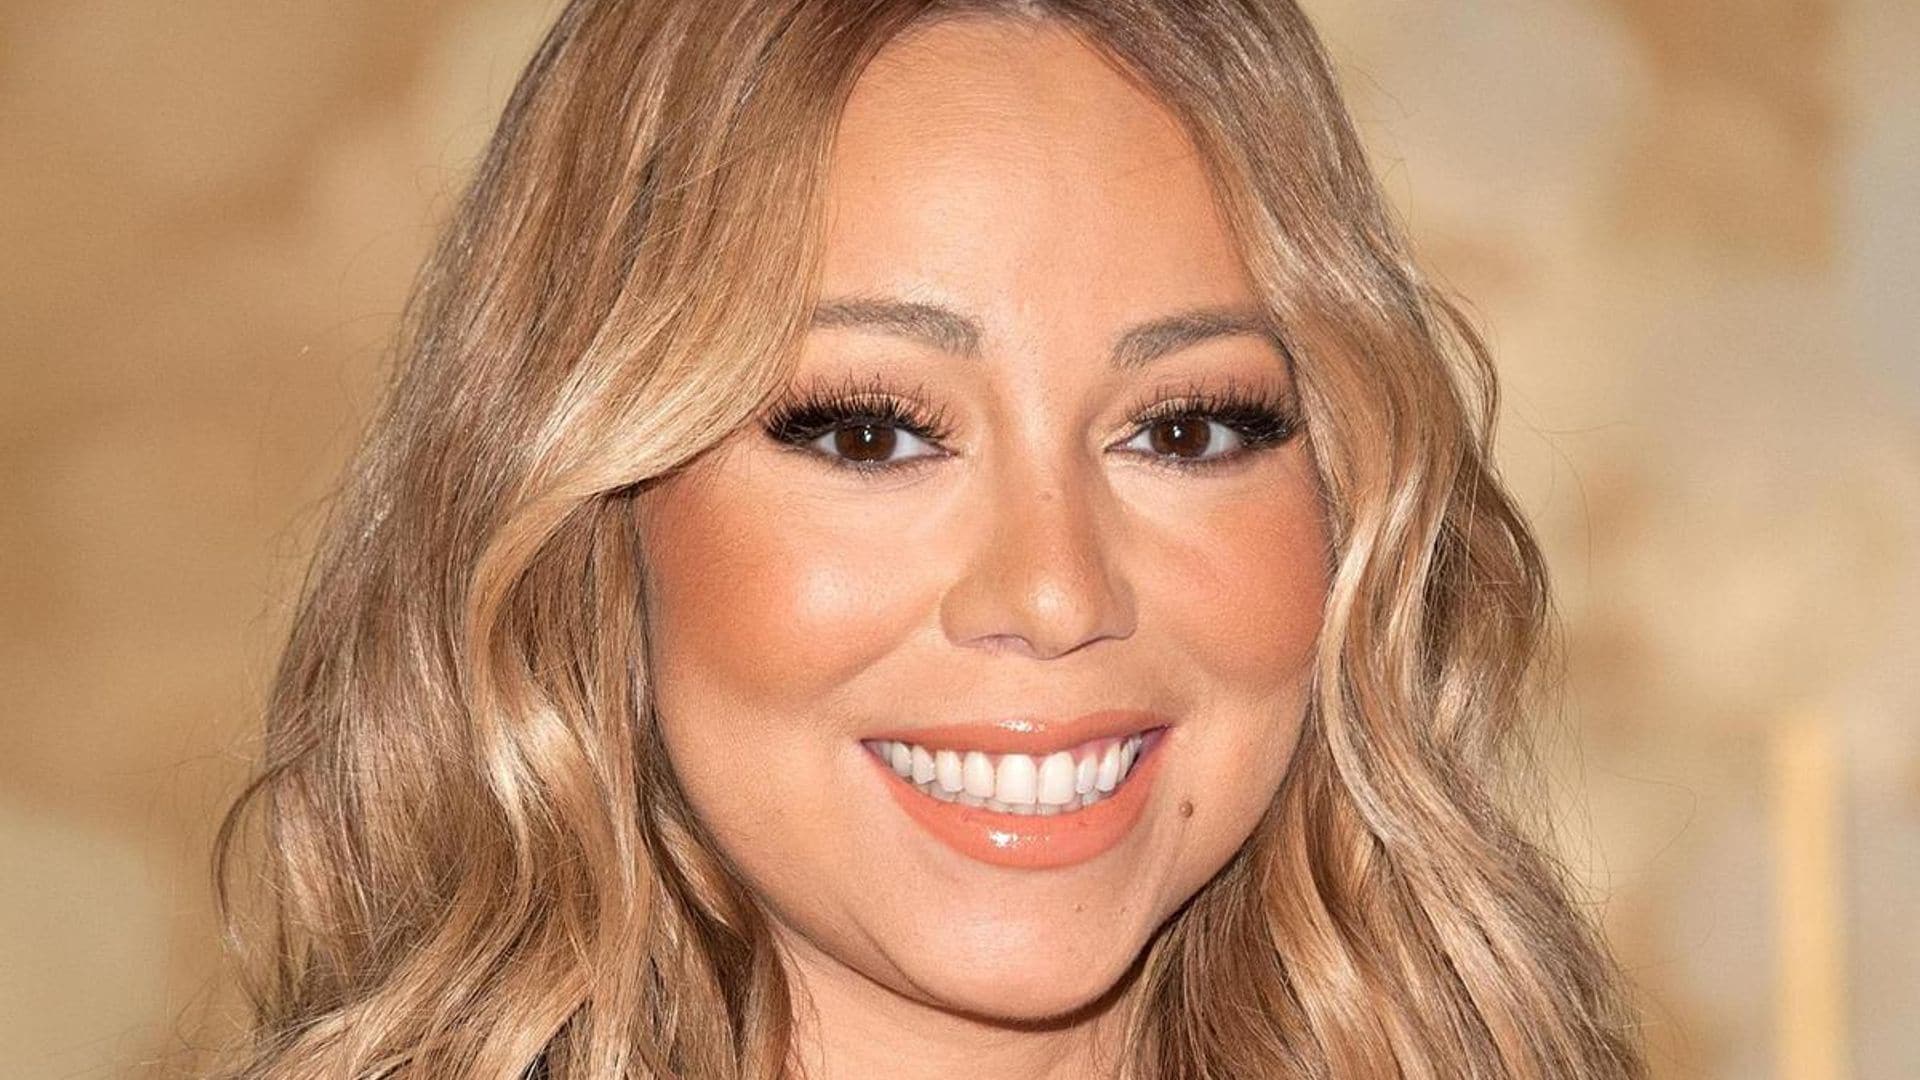 Mariah Carey will release a storybook featuring an animated character named ‘Little Mariah’